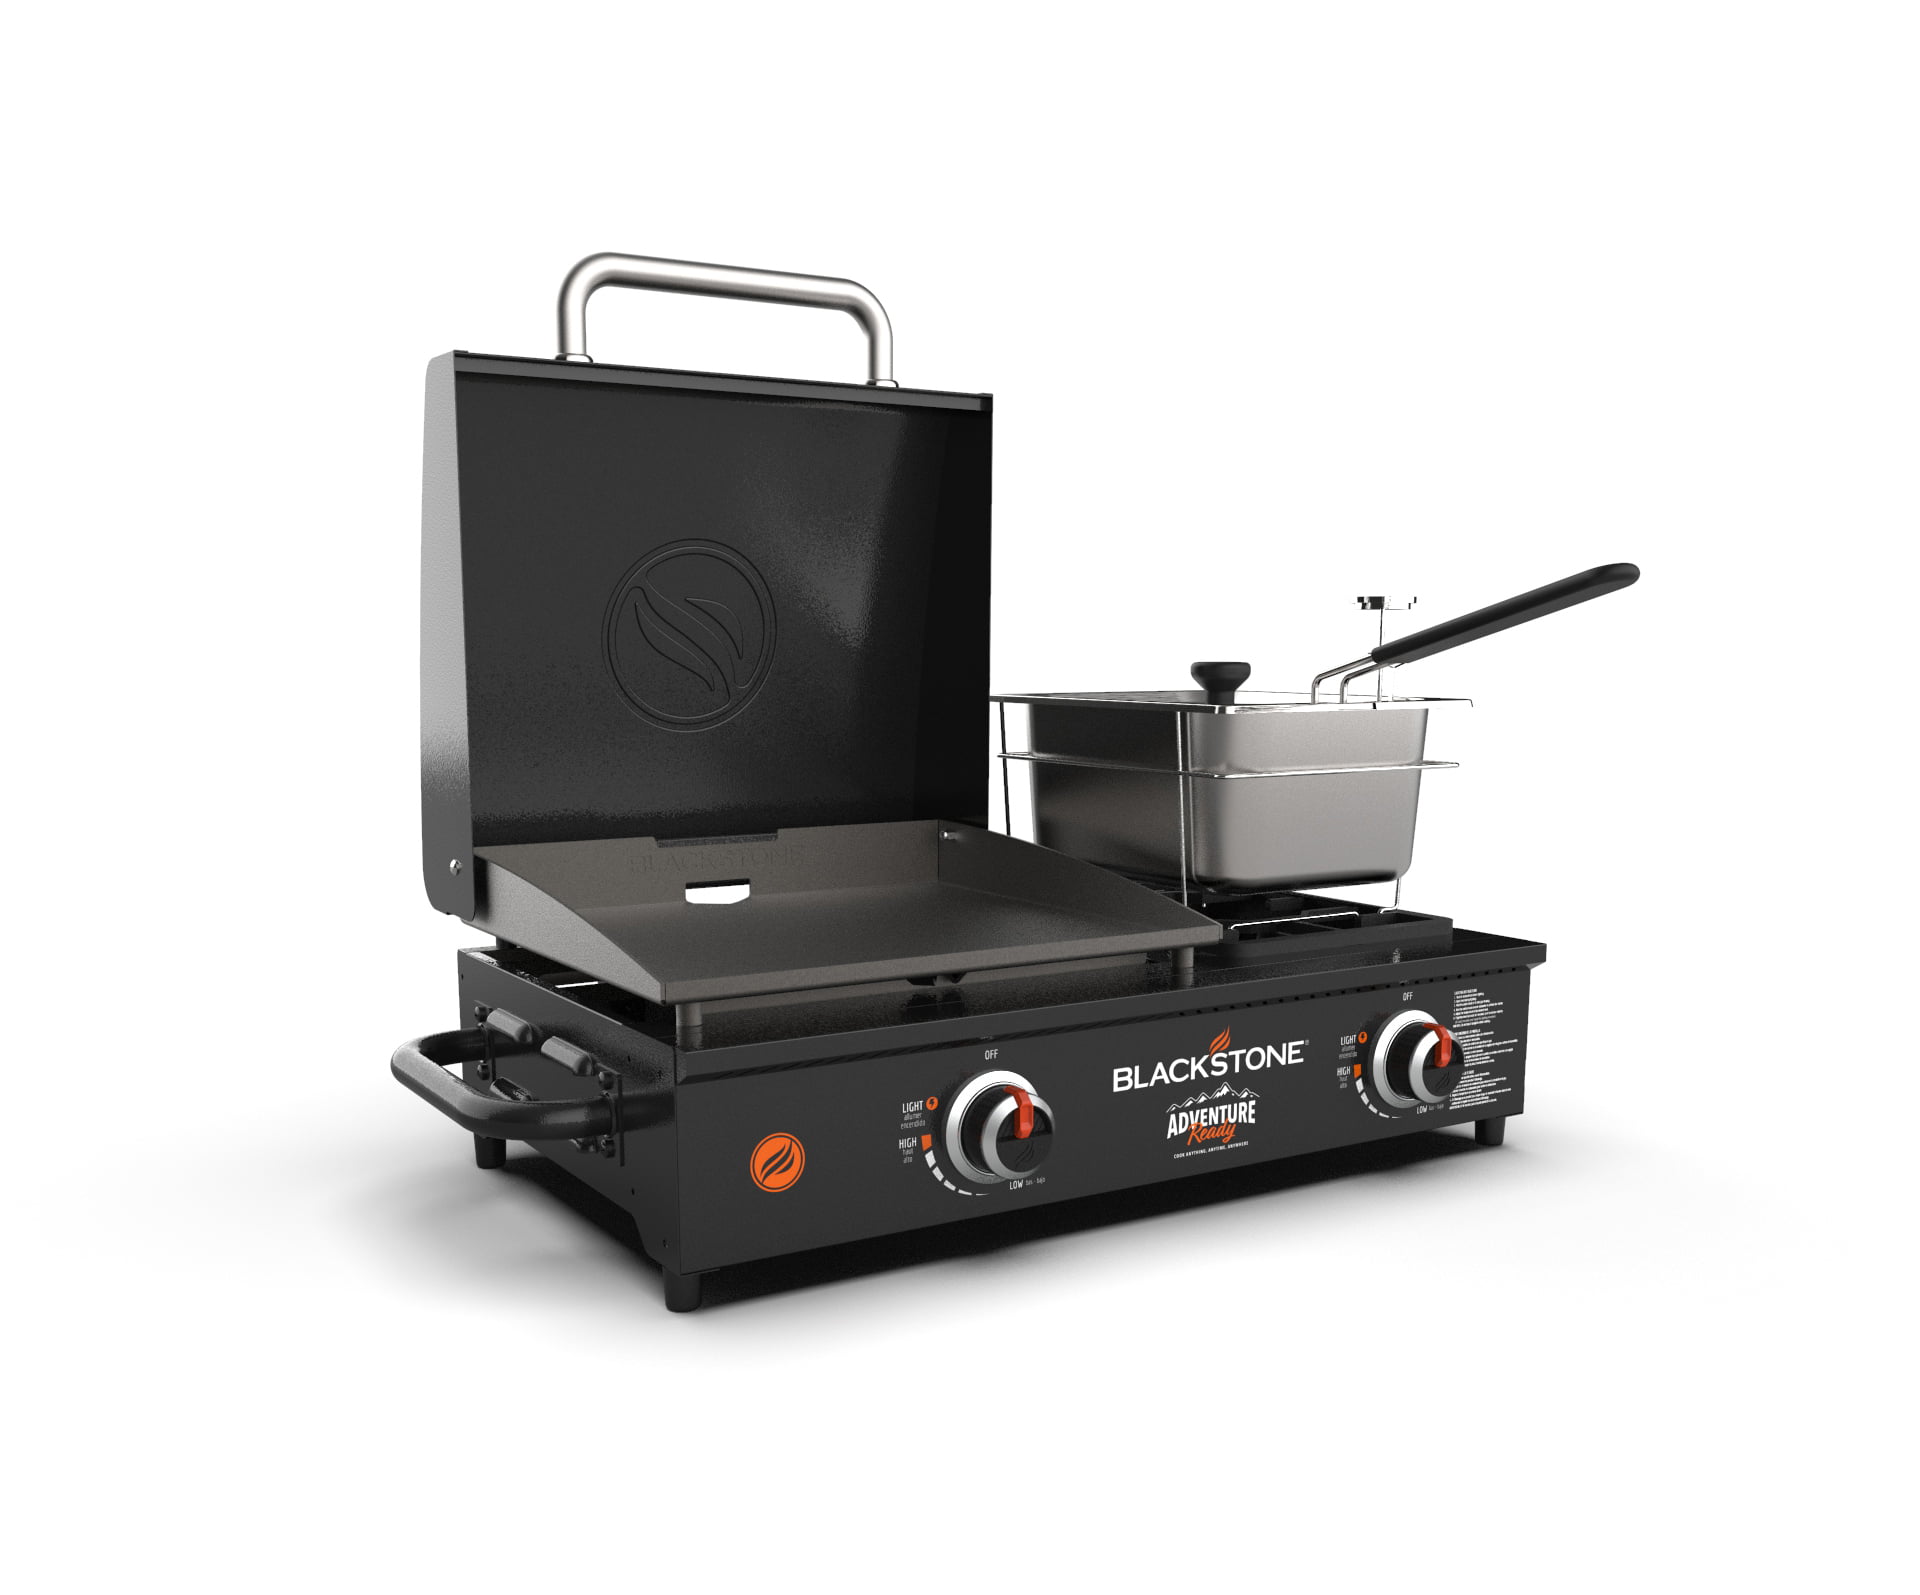 17 Electric Tabletop Griddle – Blackstone Products